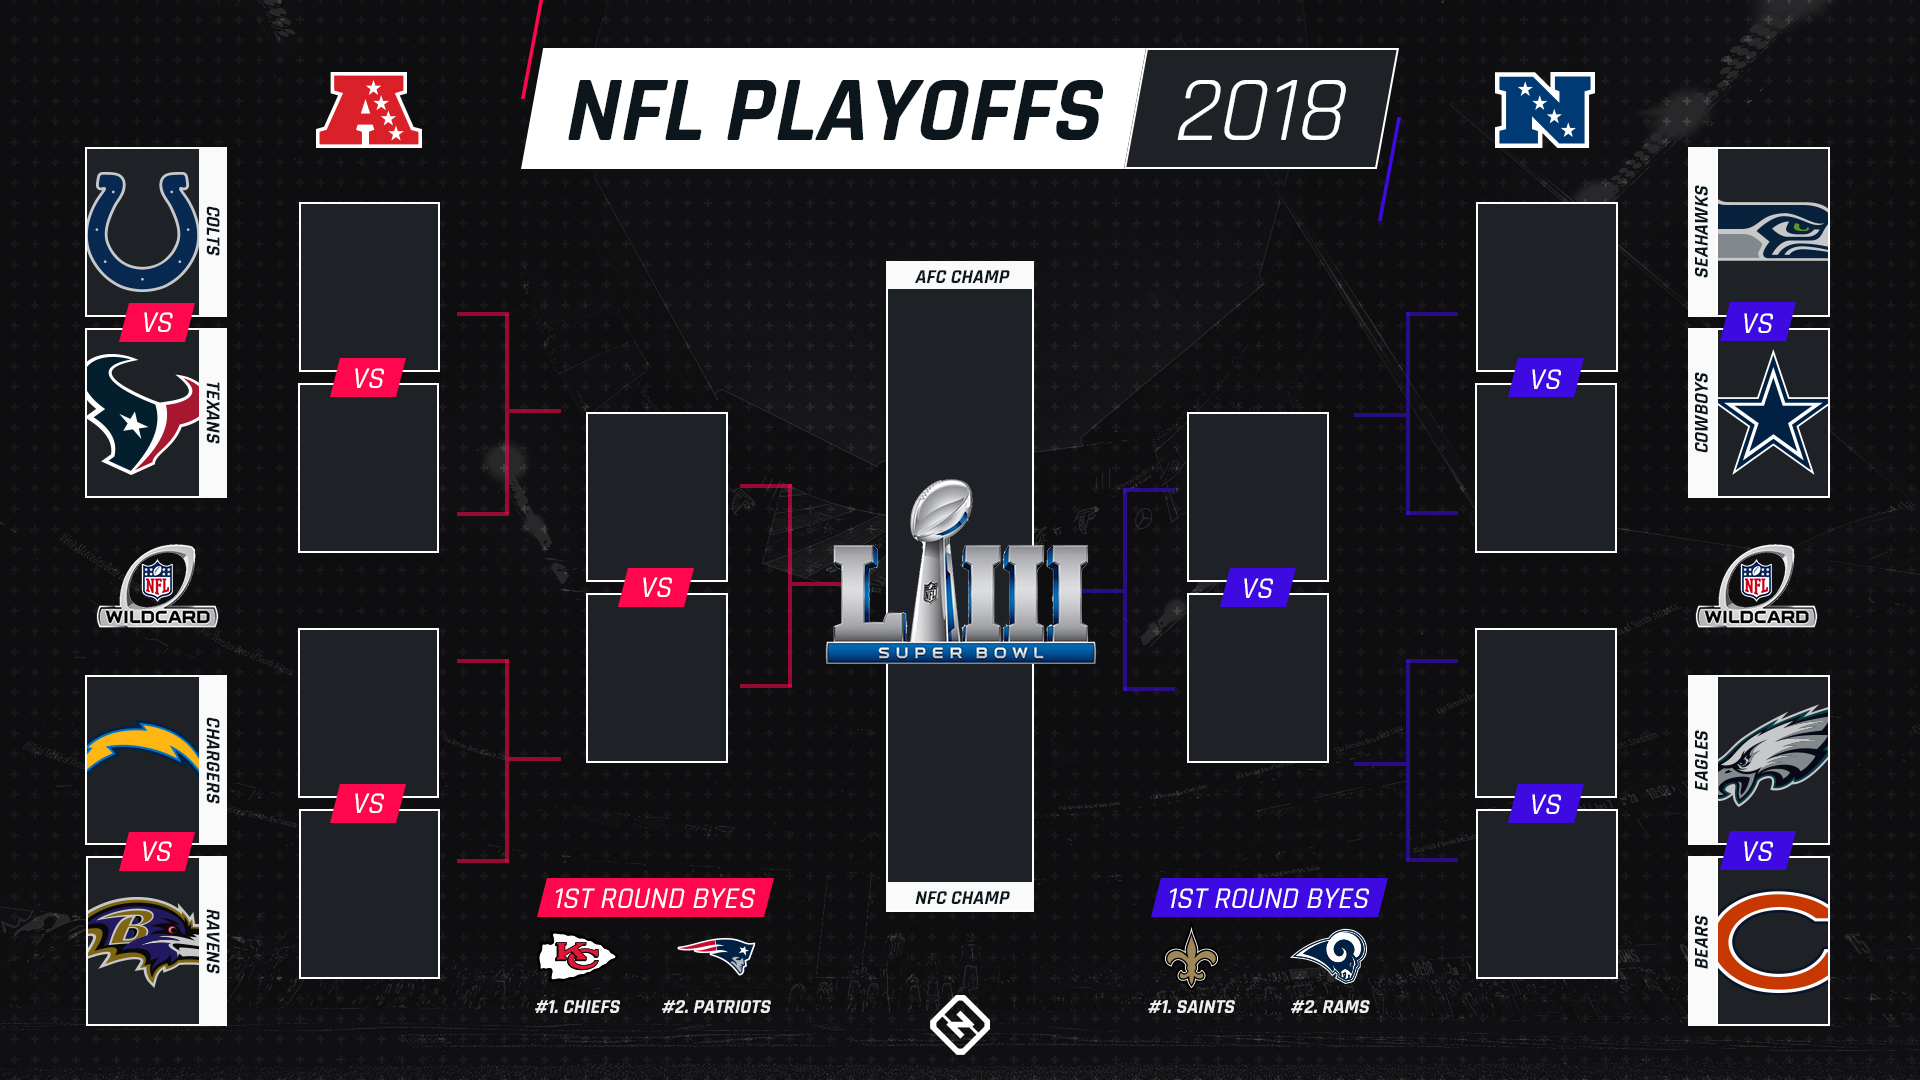 NFL playoff schedule: Dates, times, TV channels for every 2019 postseason game | NFL ...